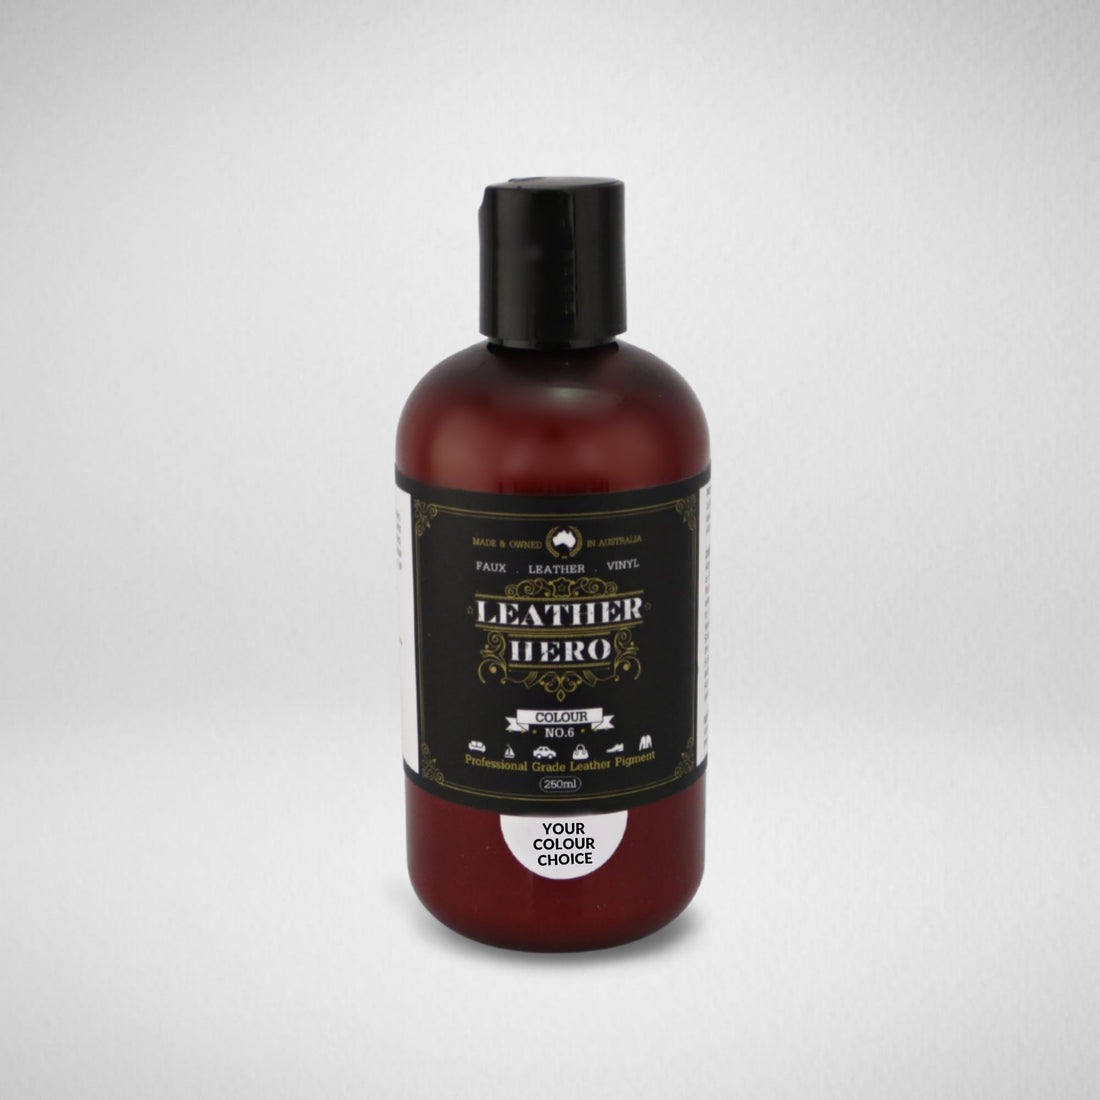 Leather Paint - Violet Leather Repair & Recolouring Leather Hero Australia